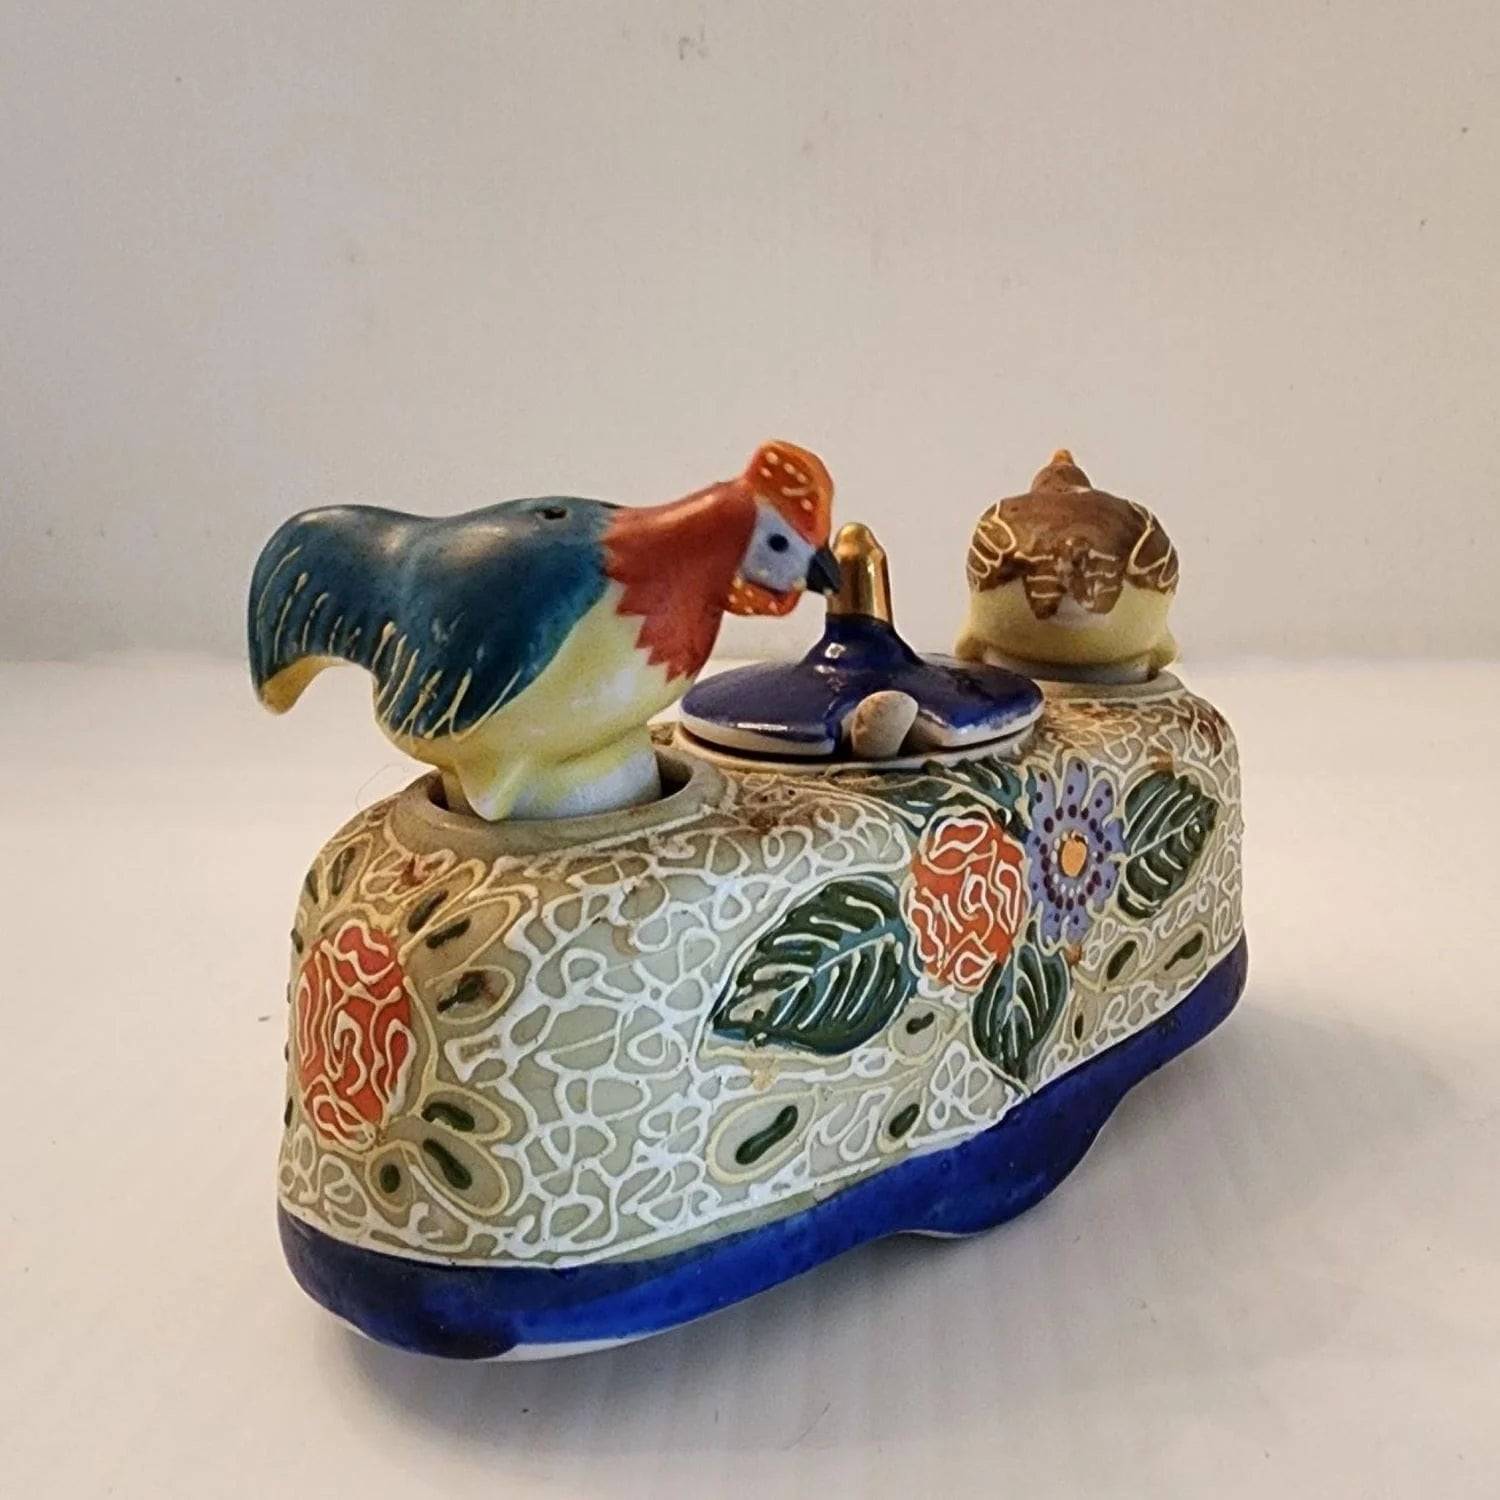 Delicate ceramic tray adorned with two bird designs.